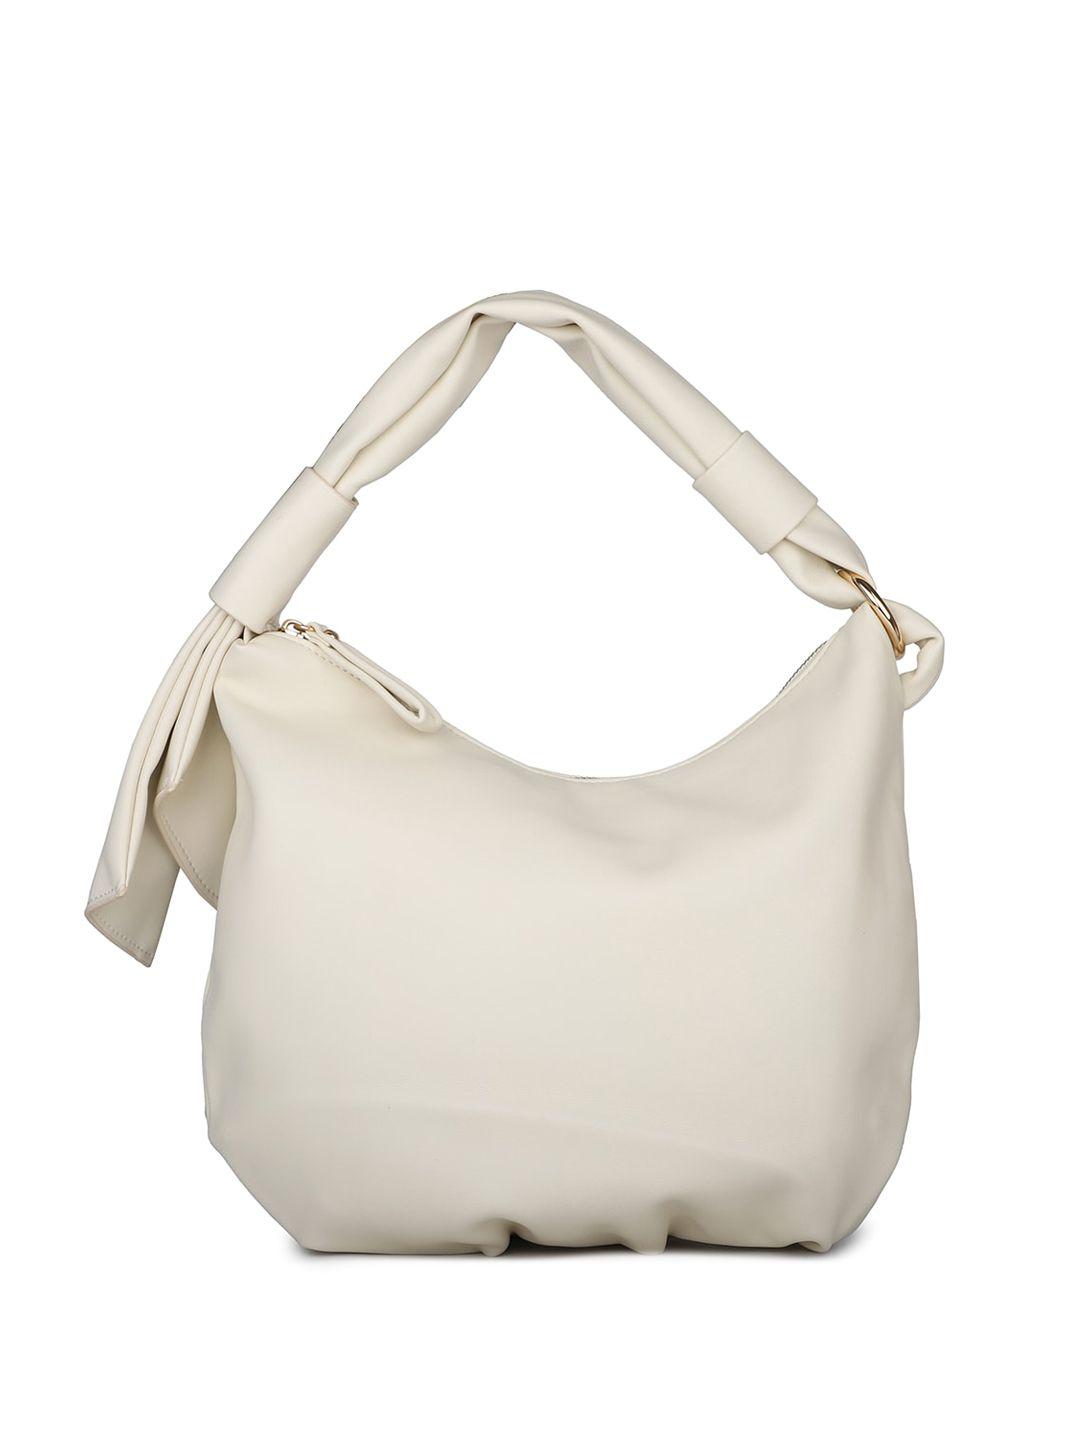 inc 5 textured structured hobo bag